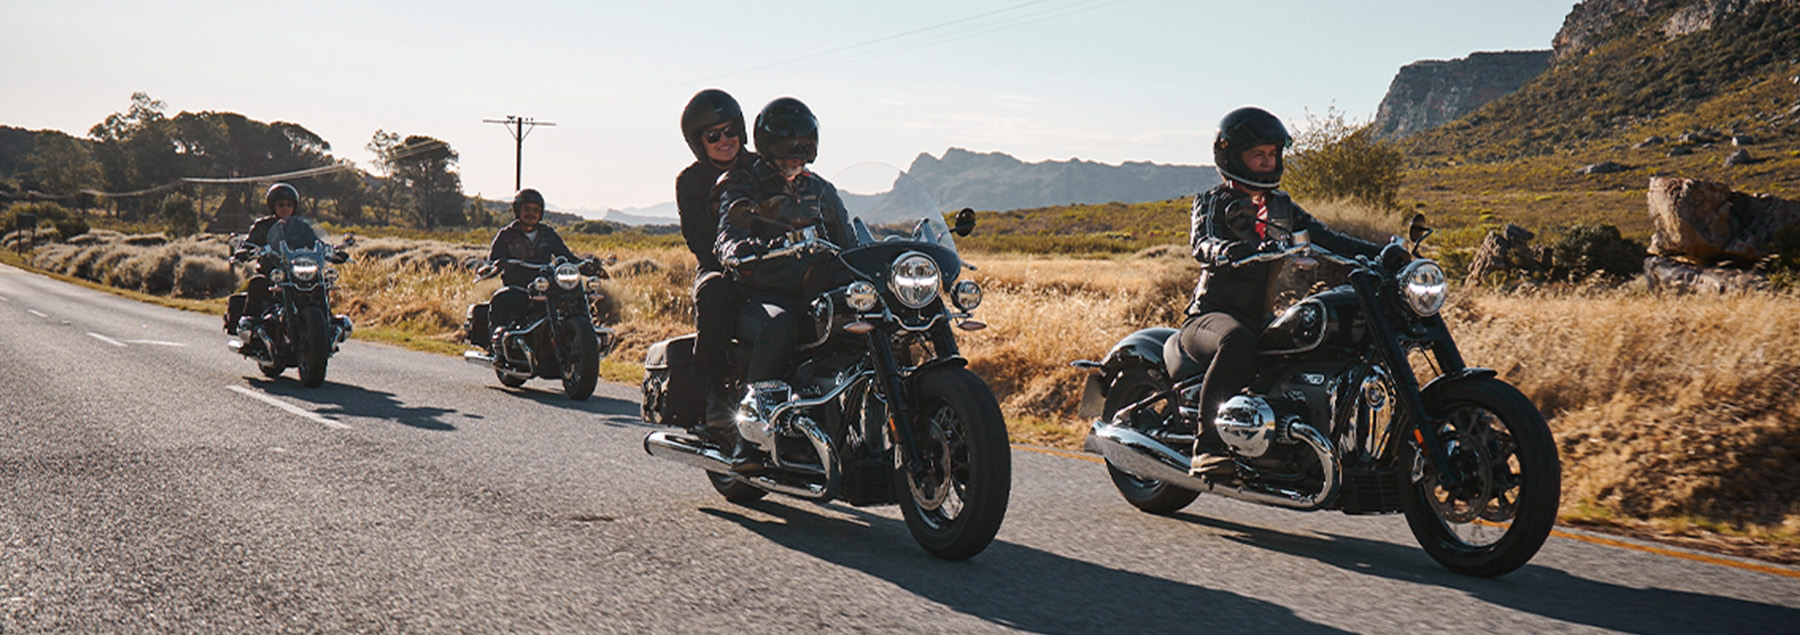 A group of BMW Motorcycle riders on their way to outdoor sculpture parks in Northern California.